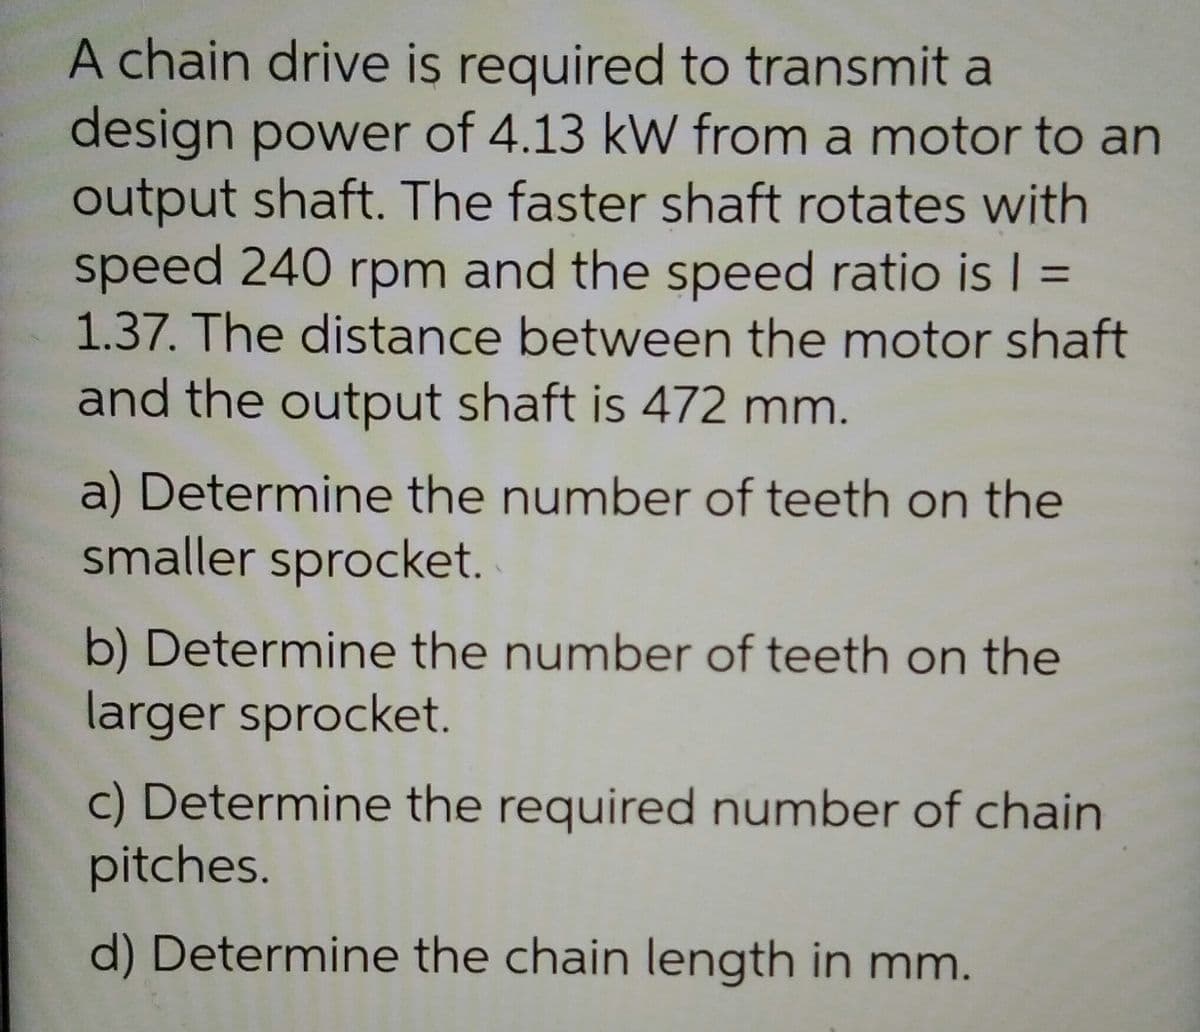 A chain drive is required to transmit a
design power of 4.13 kW from a motor to an
output shaft. The faster shaft rotates with
speed 240 rpm and the speed ratio is I =
1.37. The distance between the motor shaft
and the output shaft is 472 mm.
%3D
a) Determine the number of teeth on the
smaller sprocket.
b) Determine the number of teeth on the
larger sprocket.
c) Determine the required number of chain
pitches.
d) Determine the chain length in mm.
